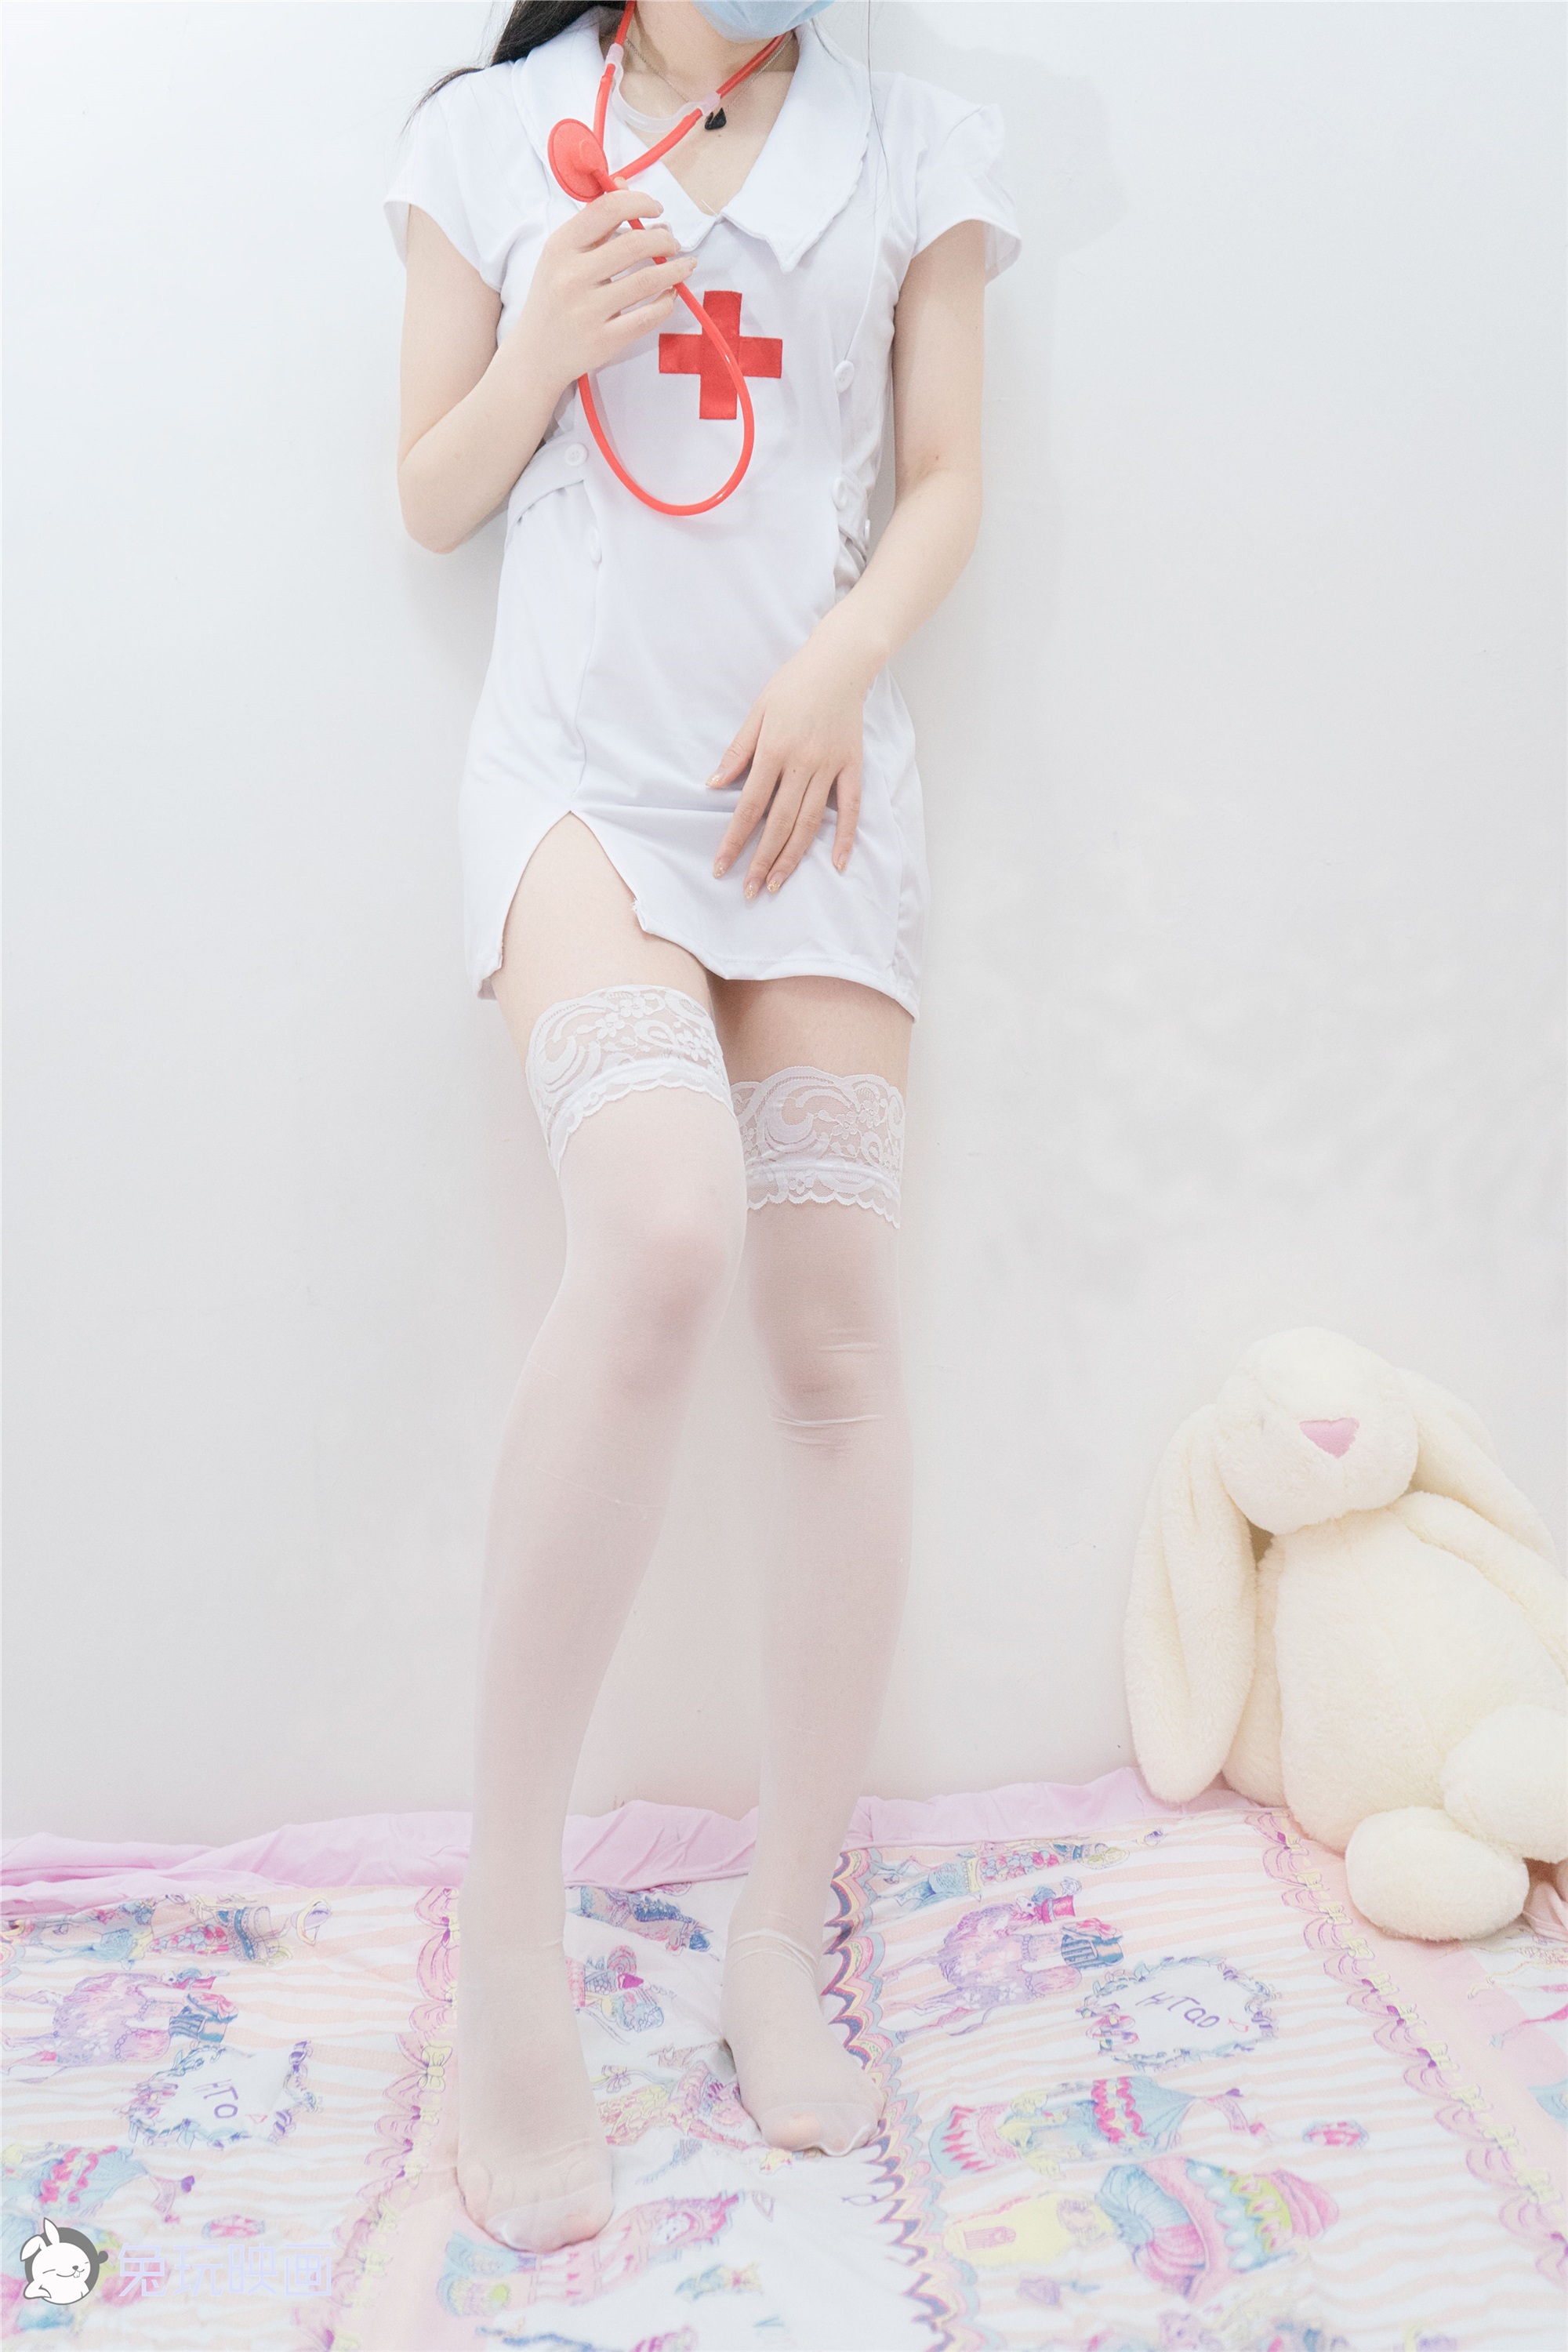 Rabbit play image series vol.066 let sister nurse care for you